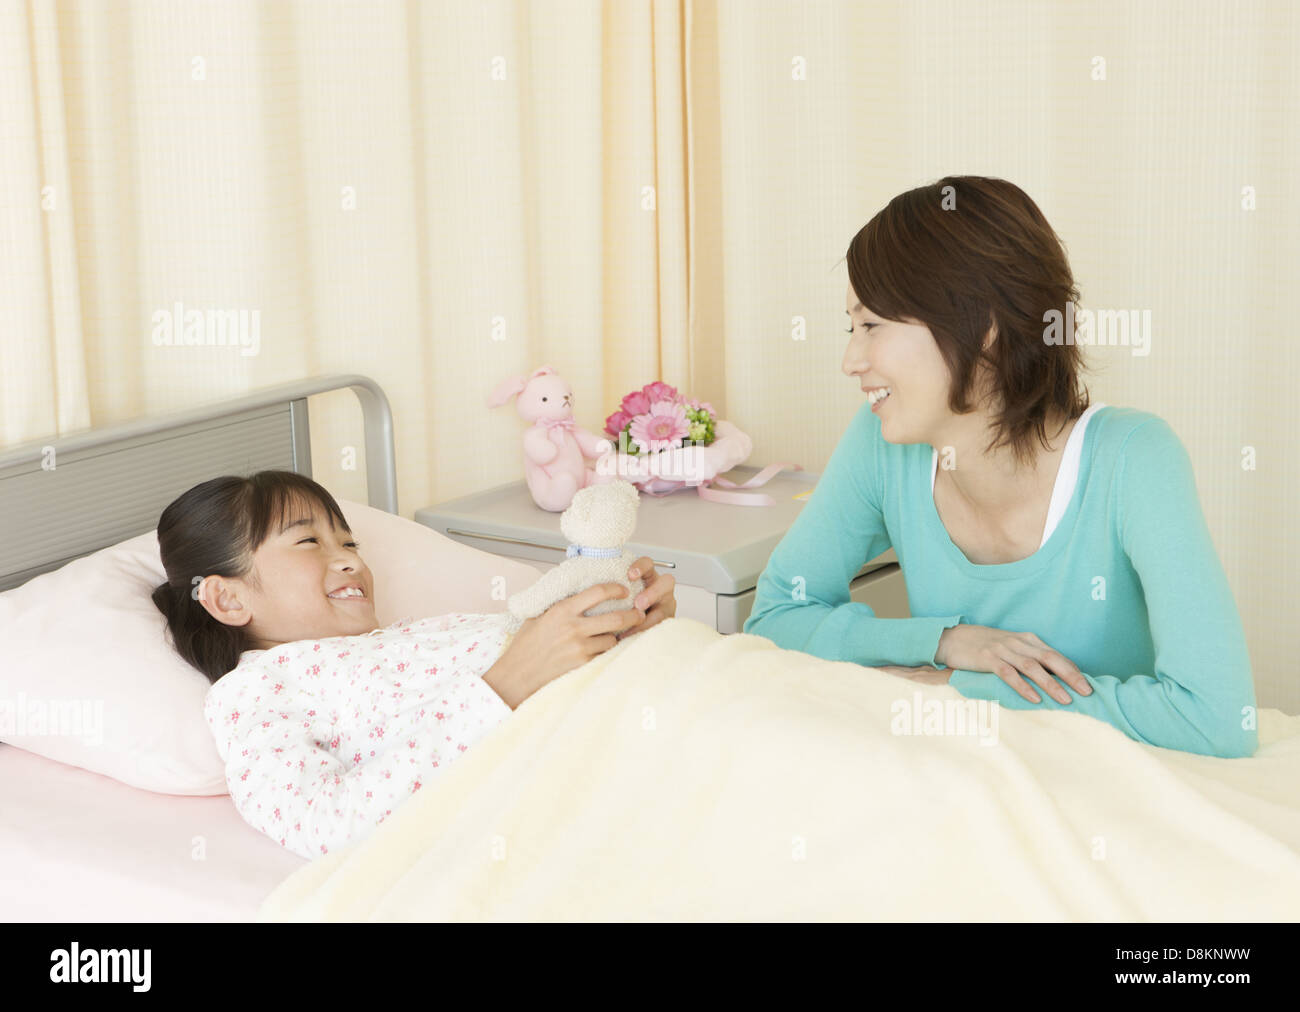 Mother and her daughter in the hospital room Stock Photo